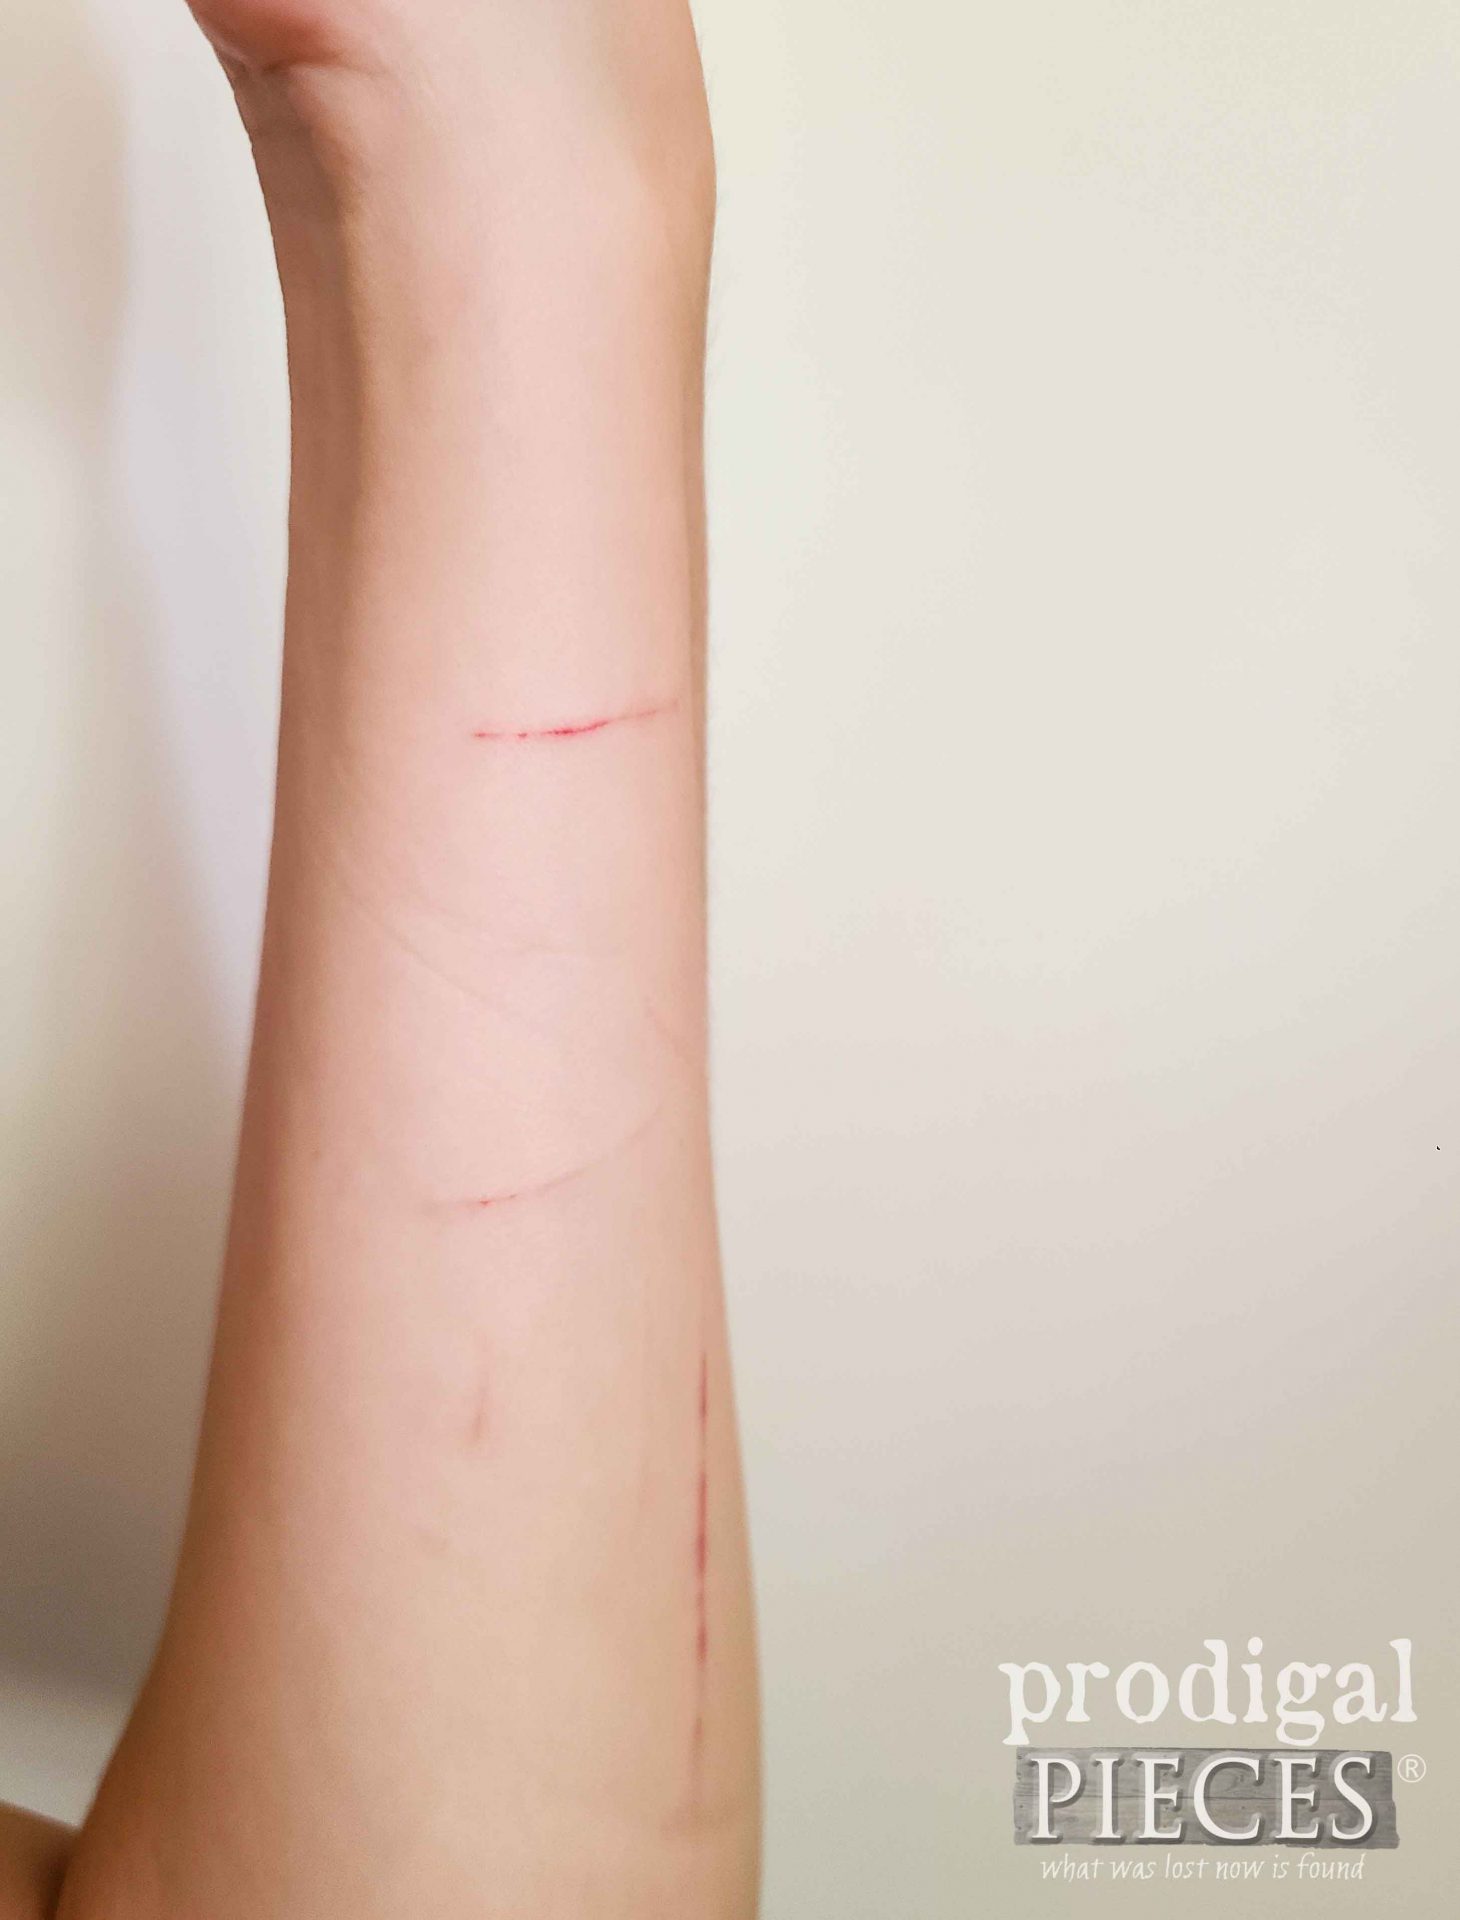 Arm Cuts from Chicken Wire | prodigalpieces.com #prodigalpieces 